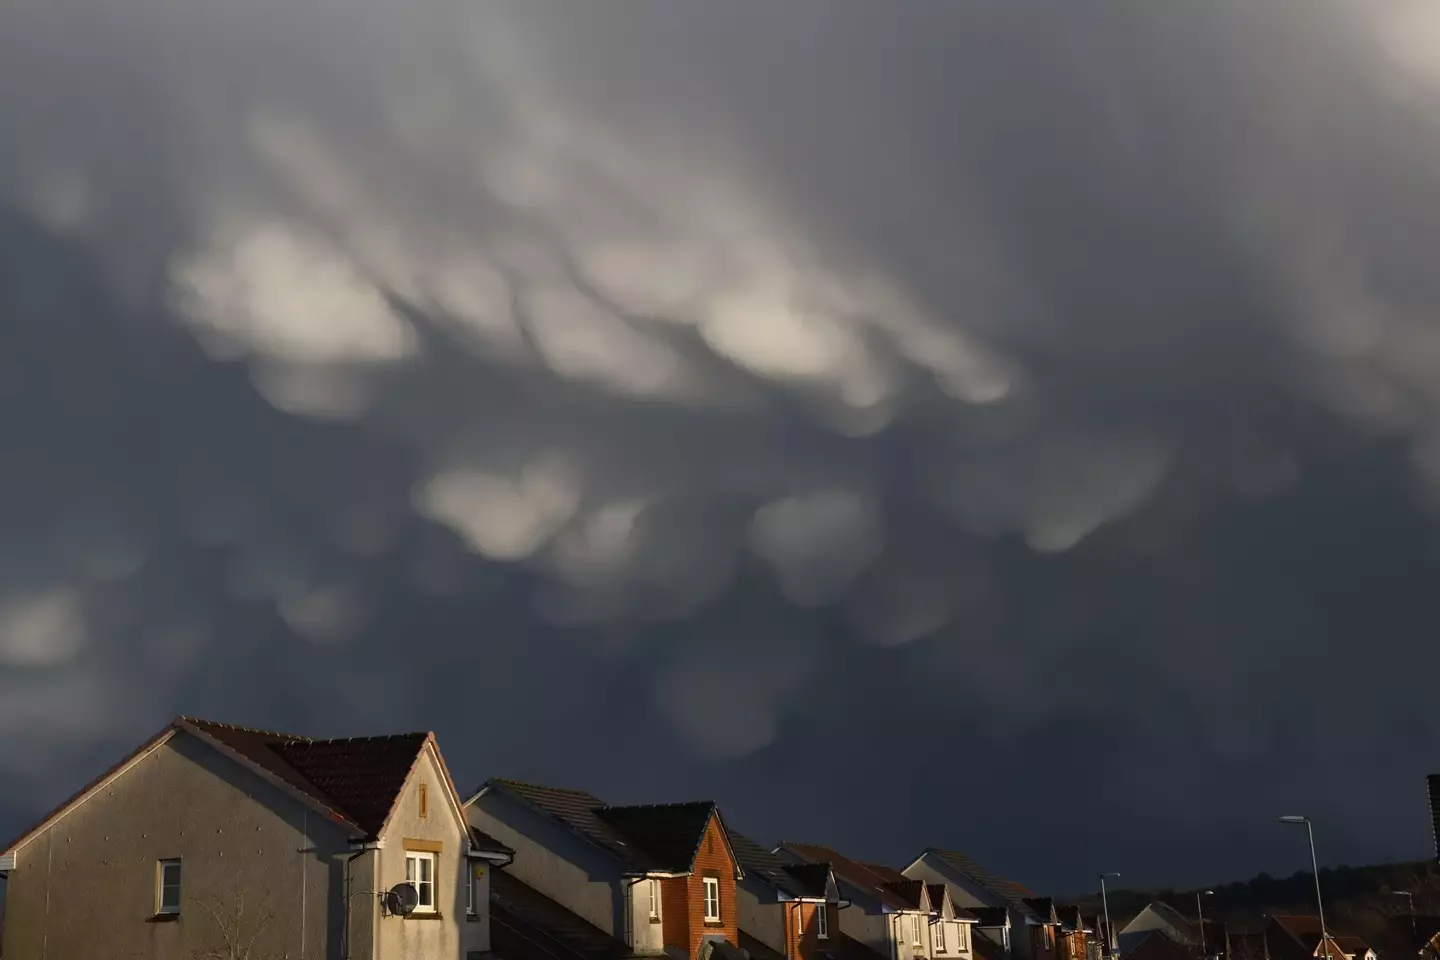 The cloud formations have been compared to 'God blowing vape bubbles'.